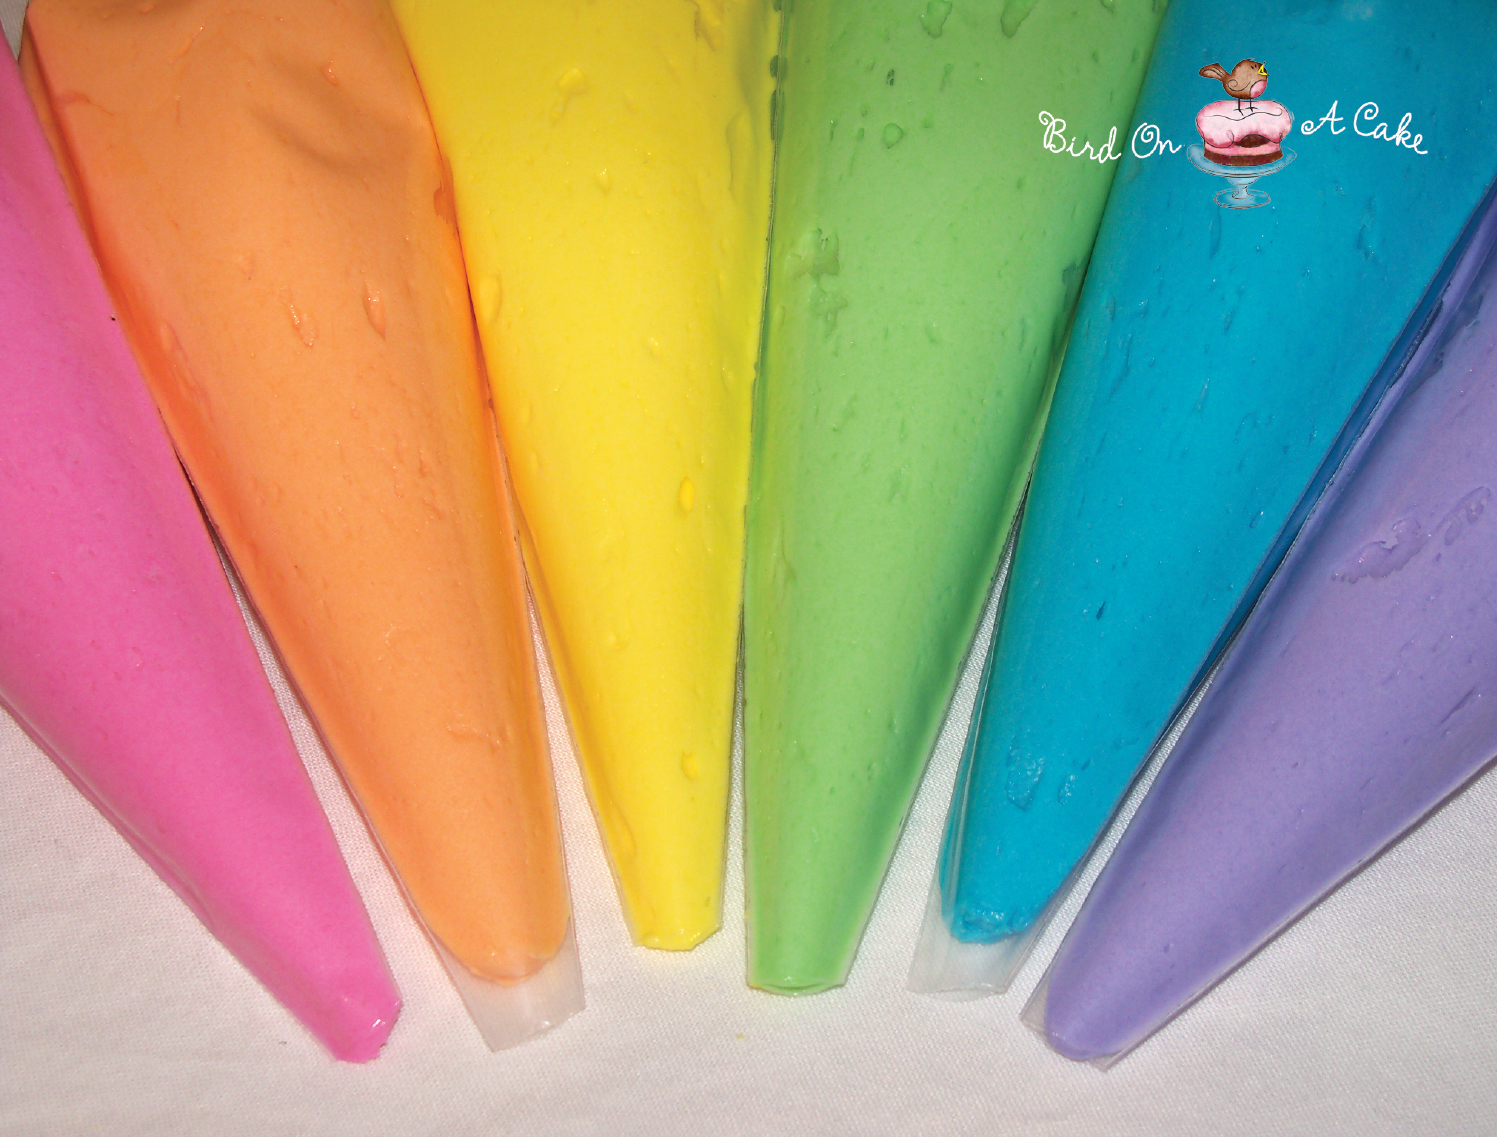 learn  (it's To for than petal buttercream to this frosting easier how how it design make make rainbow looks!), to cake